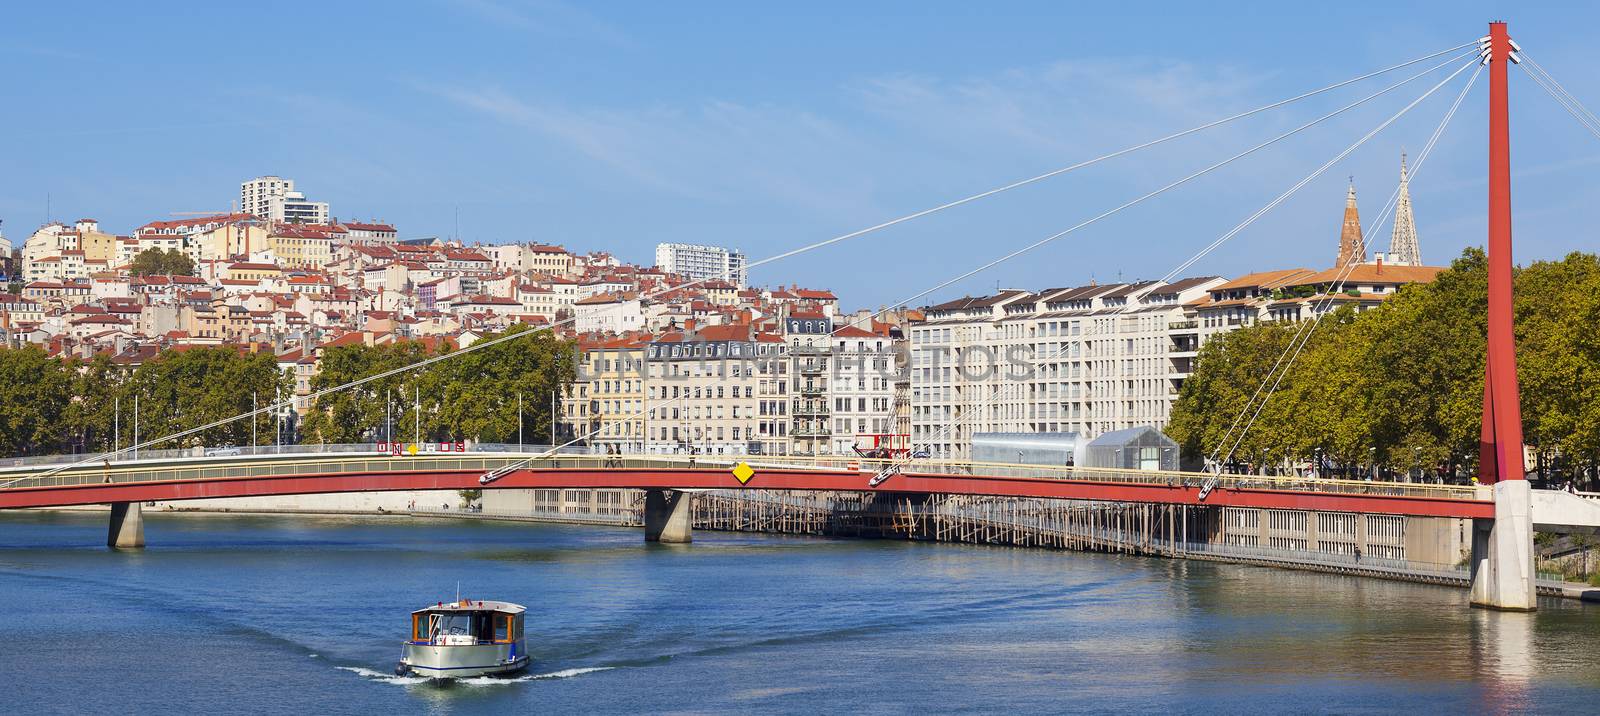 Panoramic view on Lyon and Saone river with boat, France